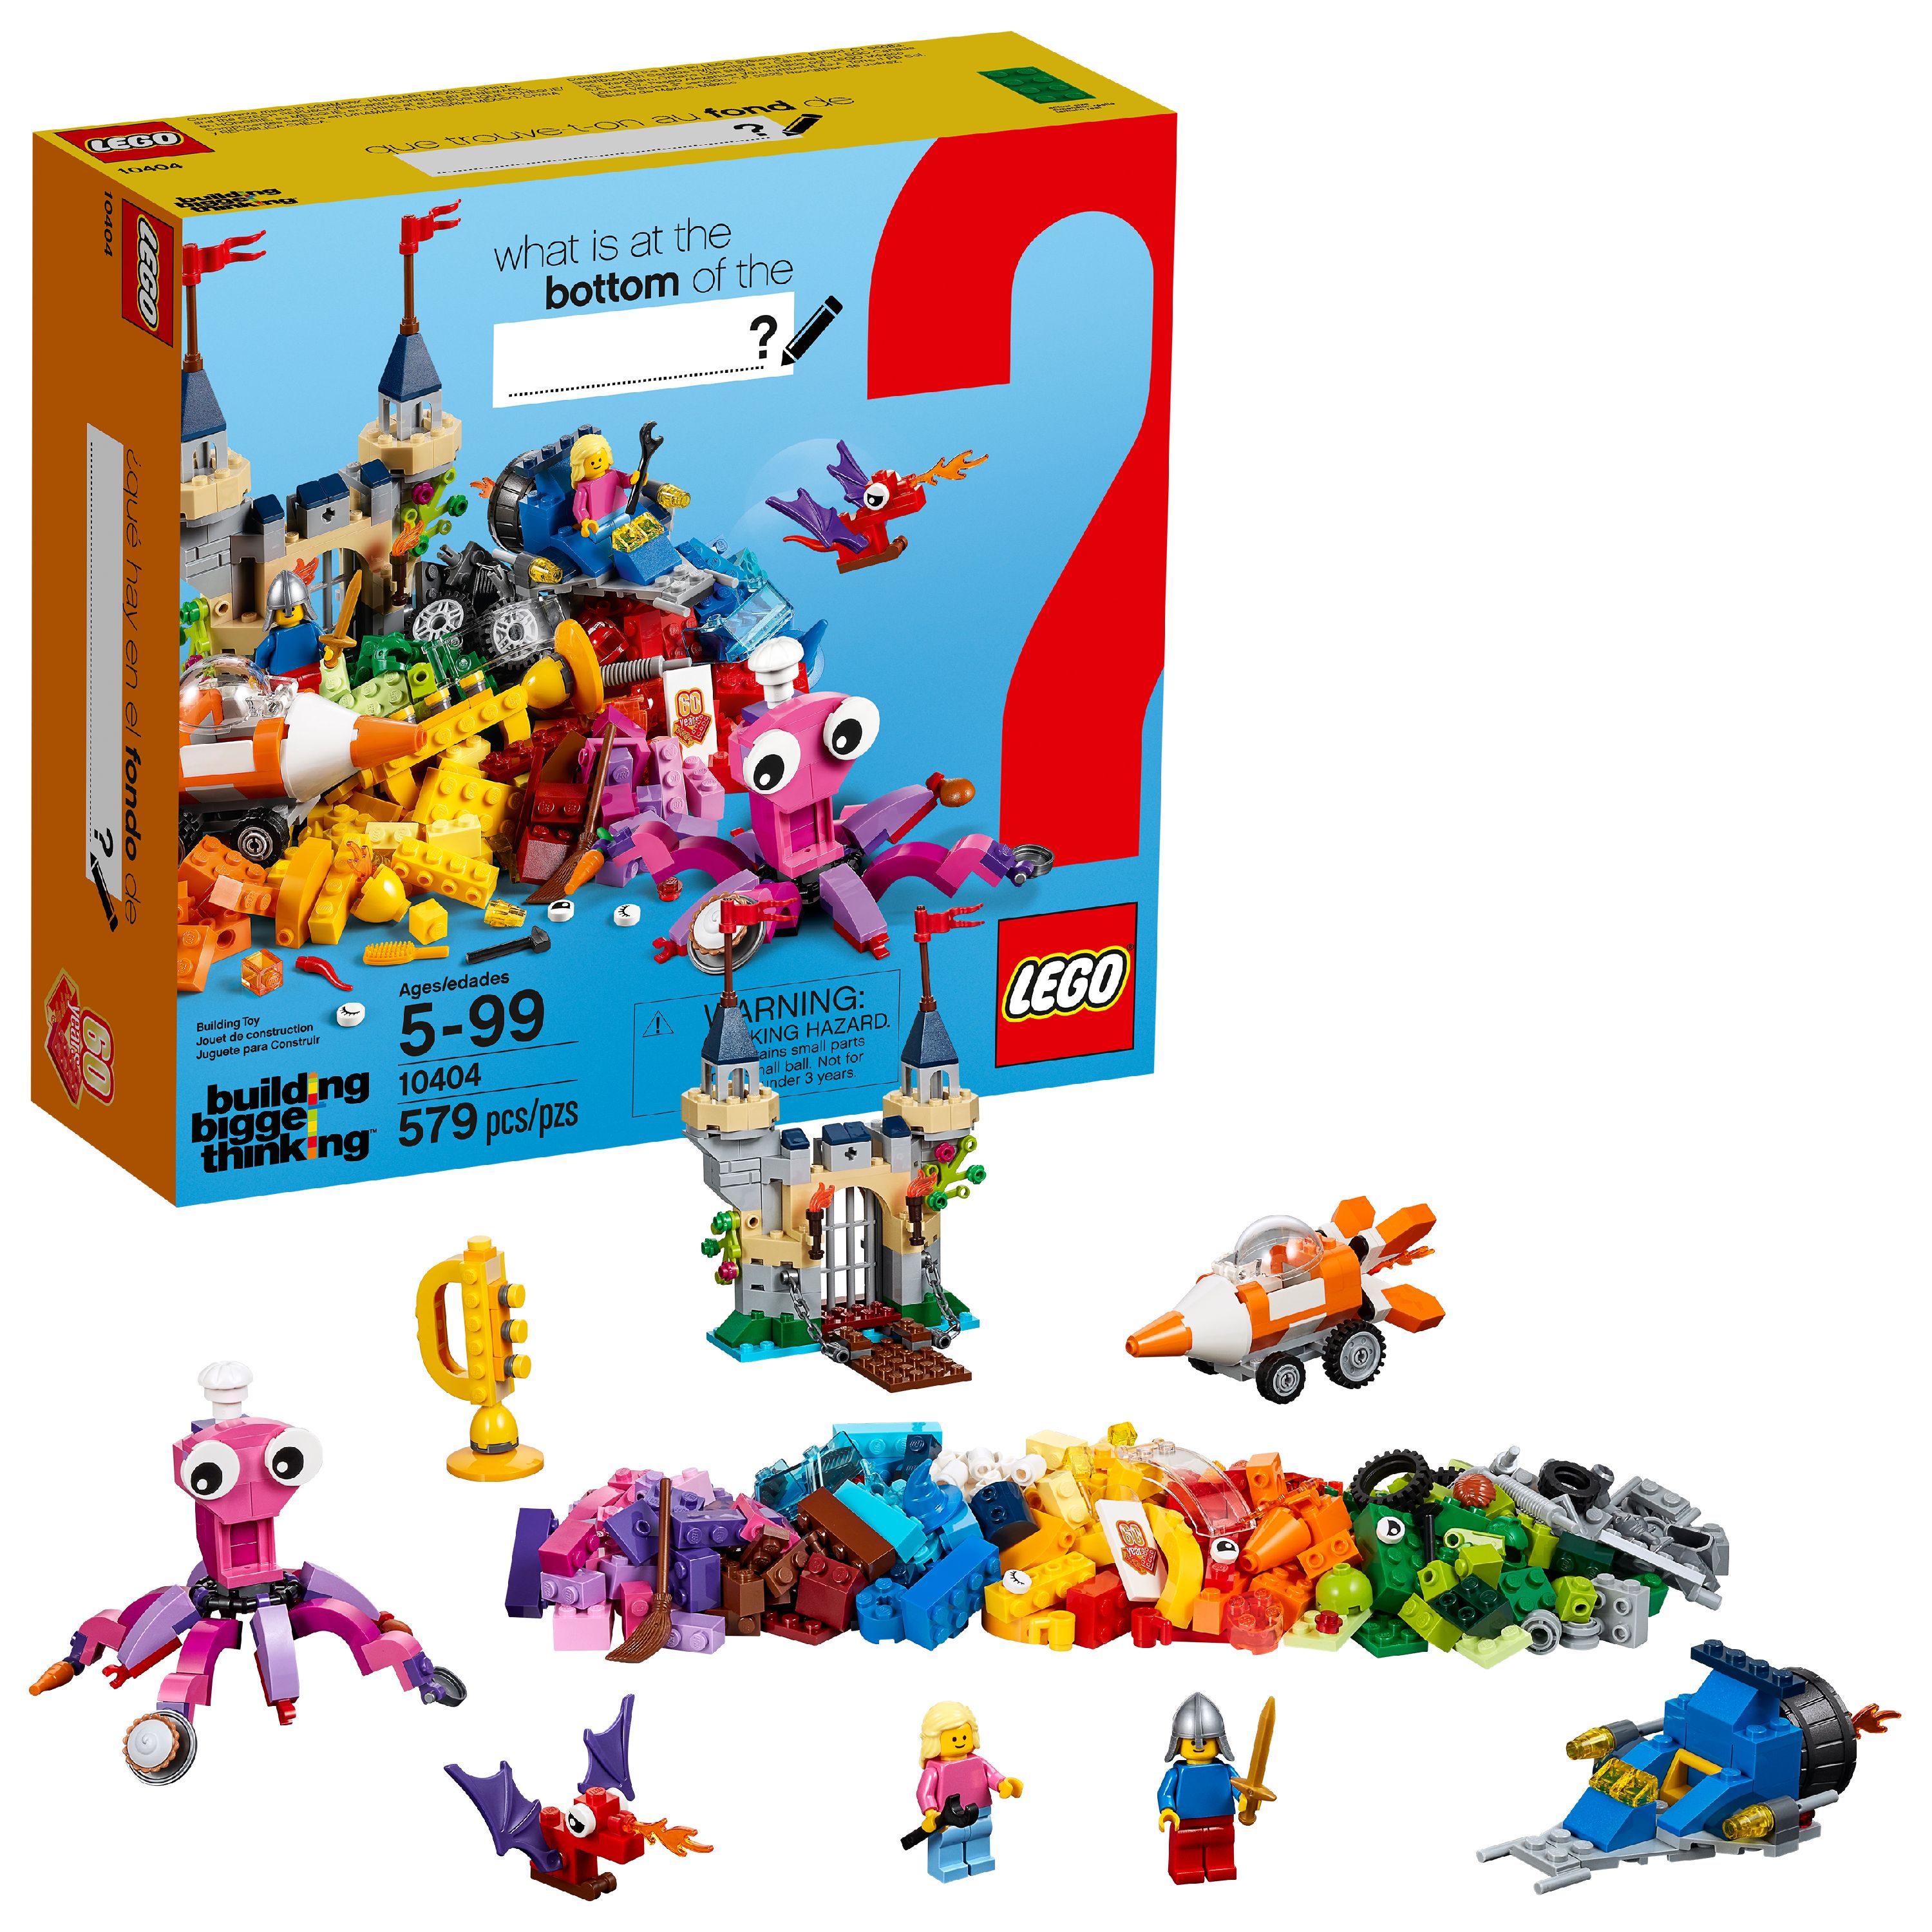 LEGO Brand Campaign Products Ocean's Bottom 10404 - image 1 of 7